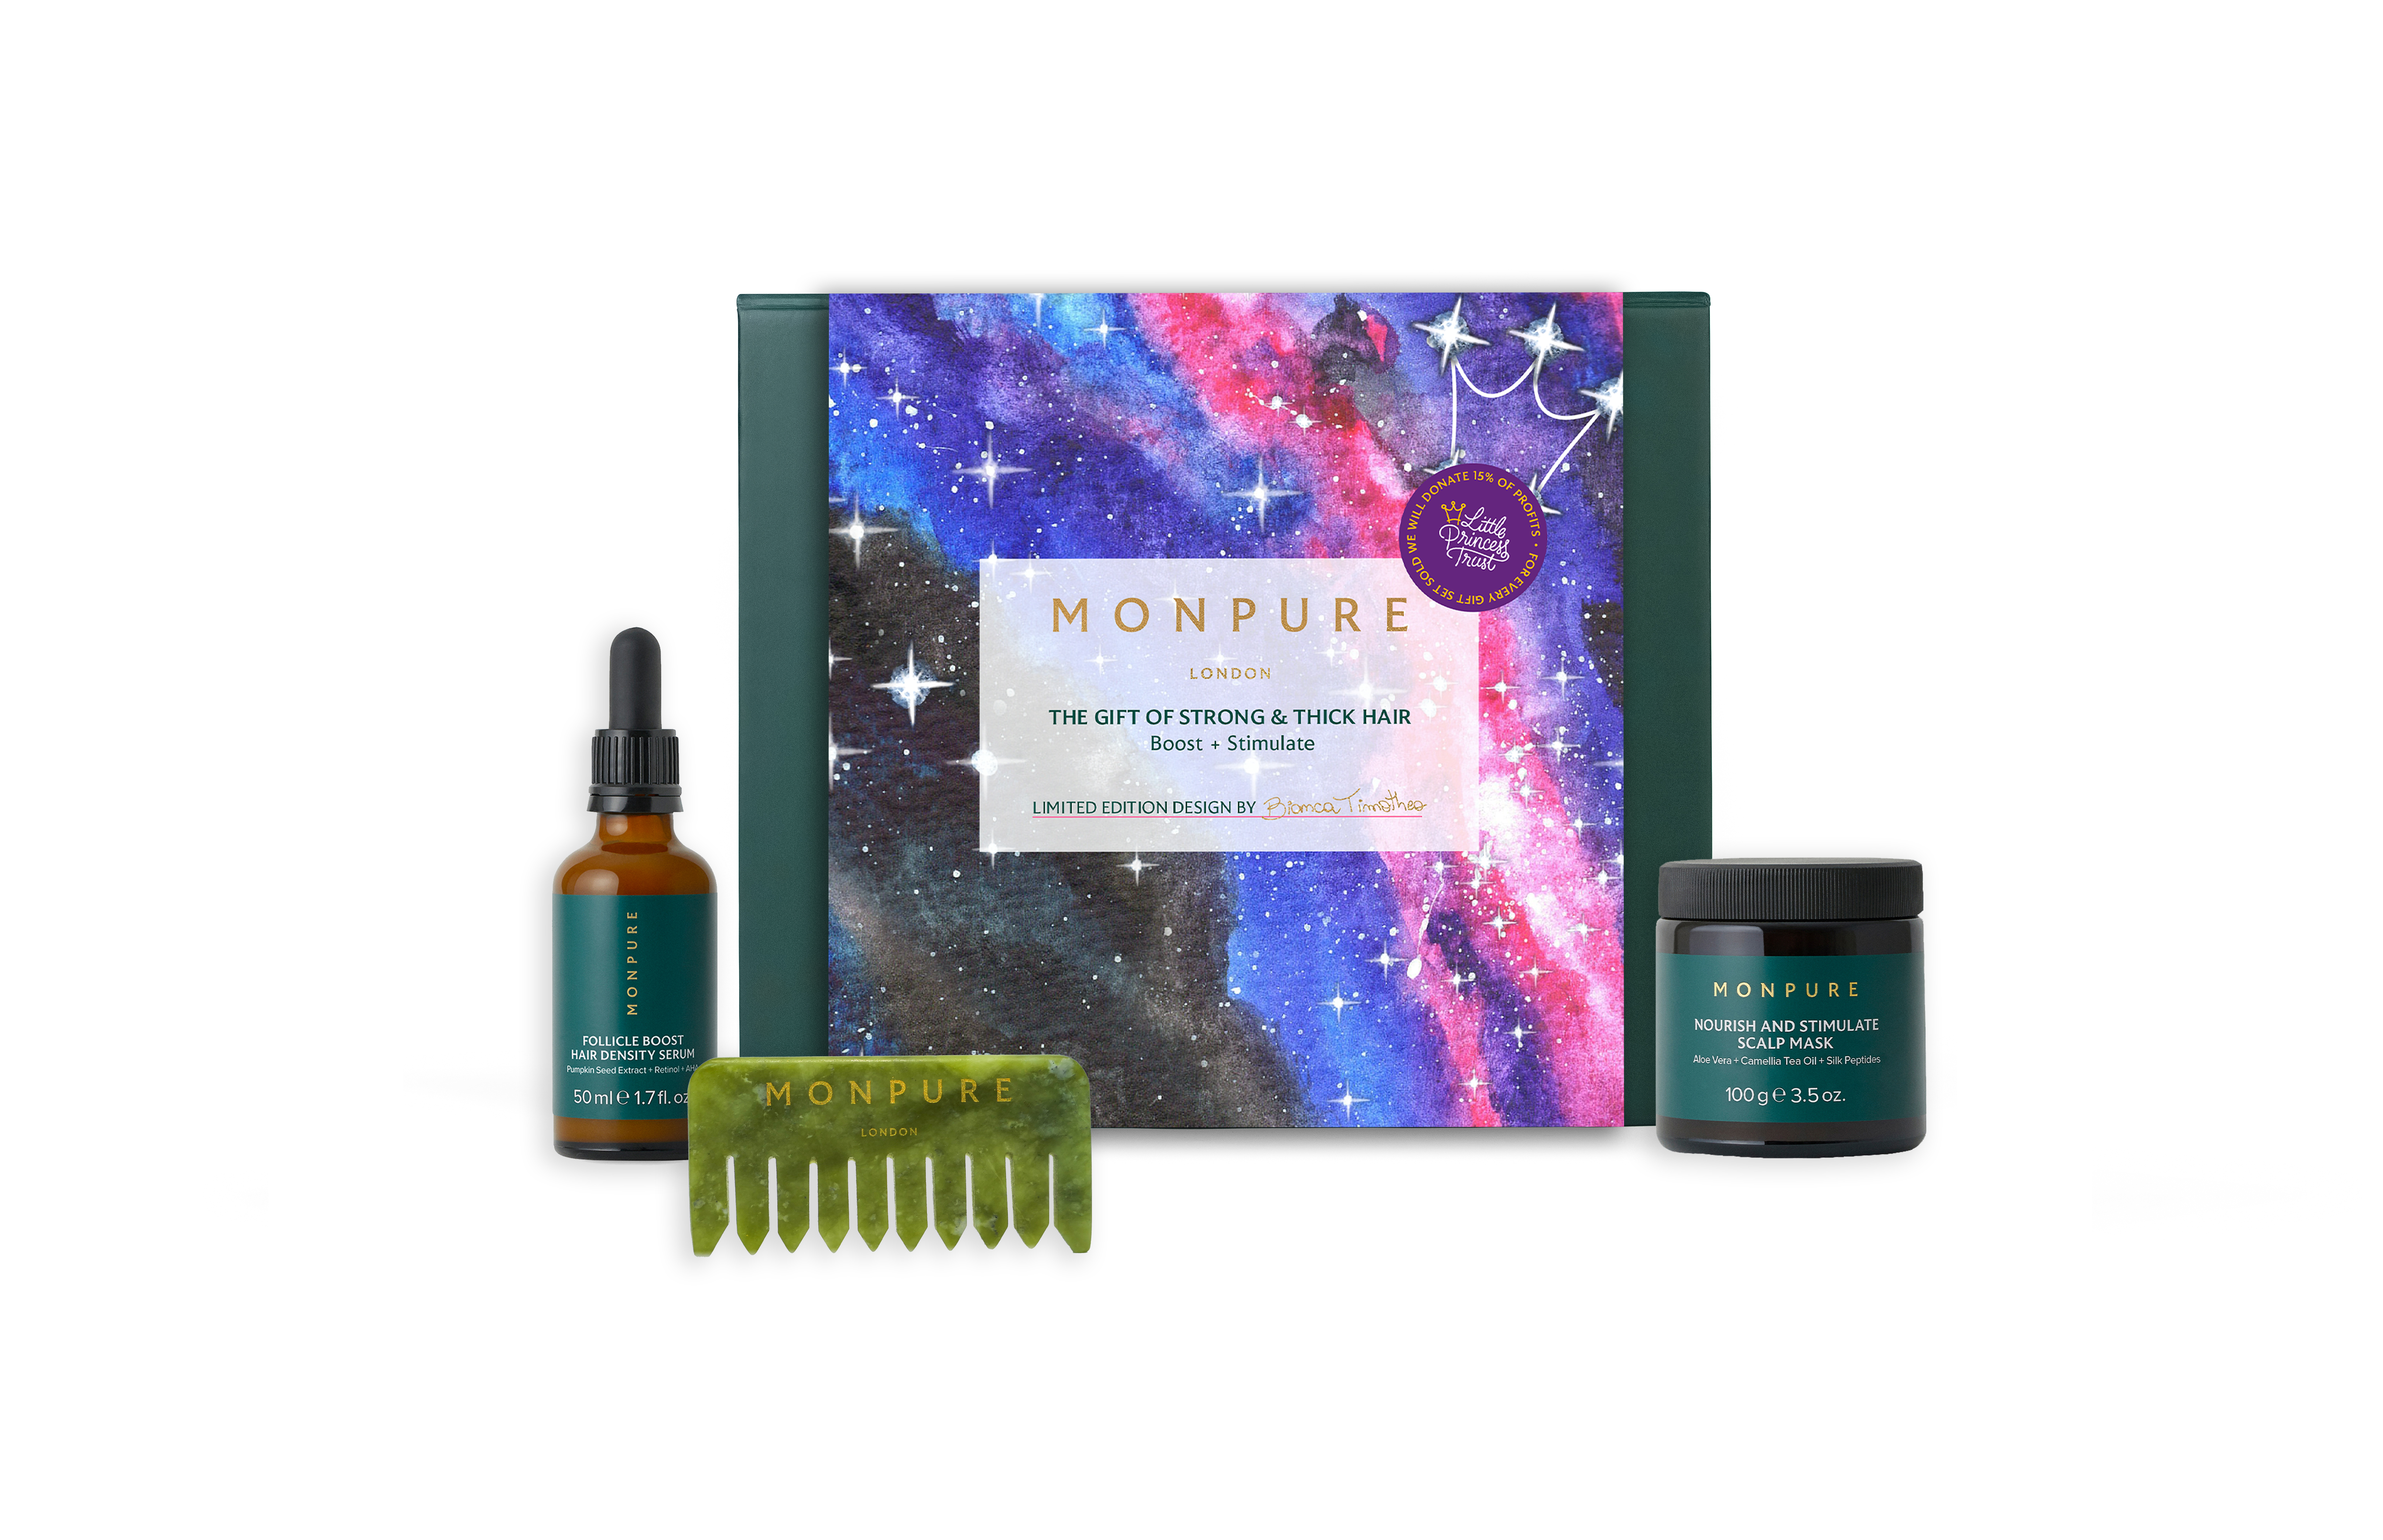 Monpure's festive gift boxes will help LPT